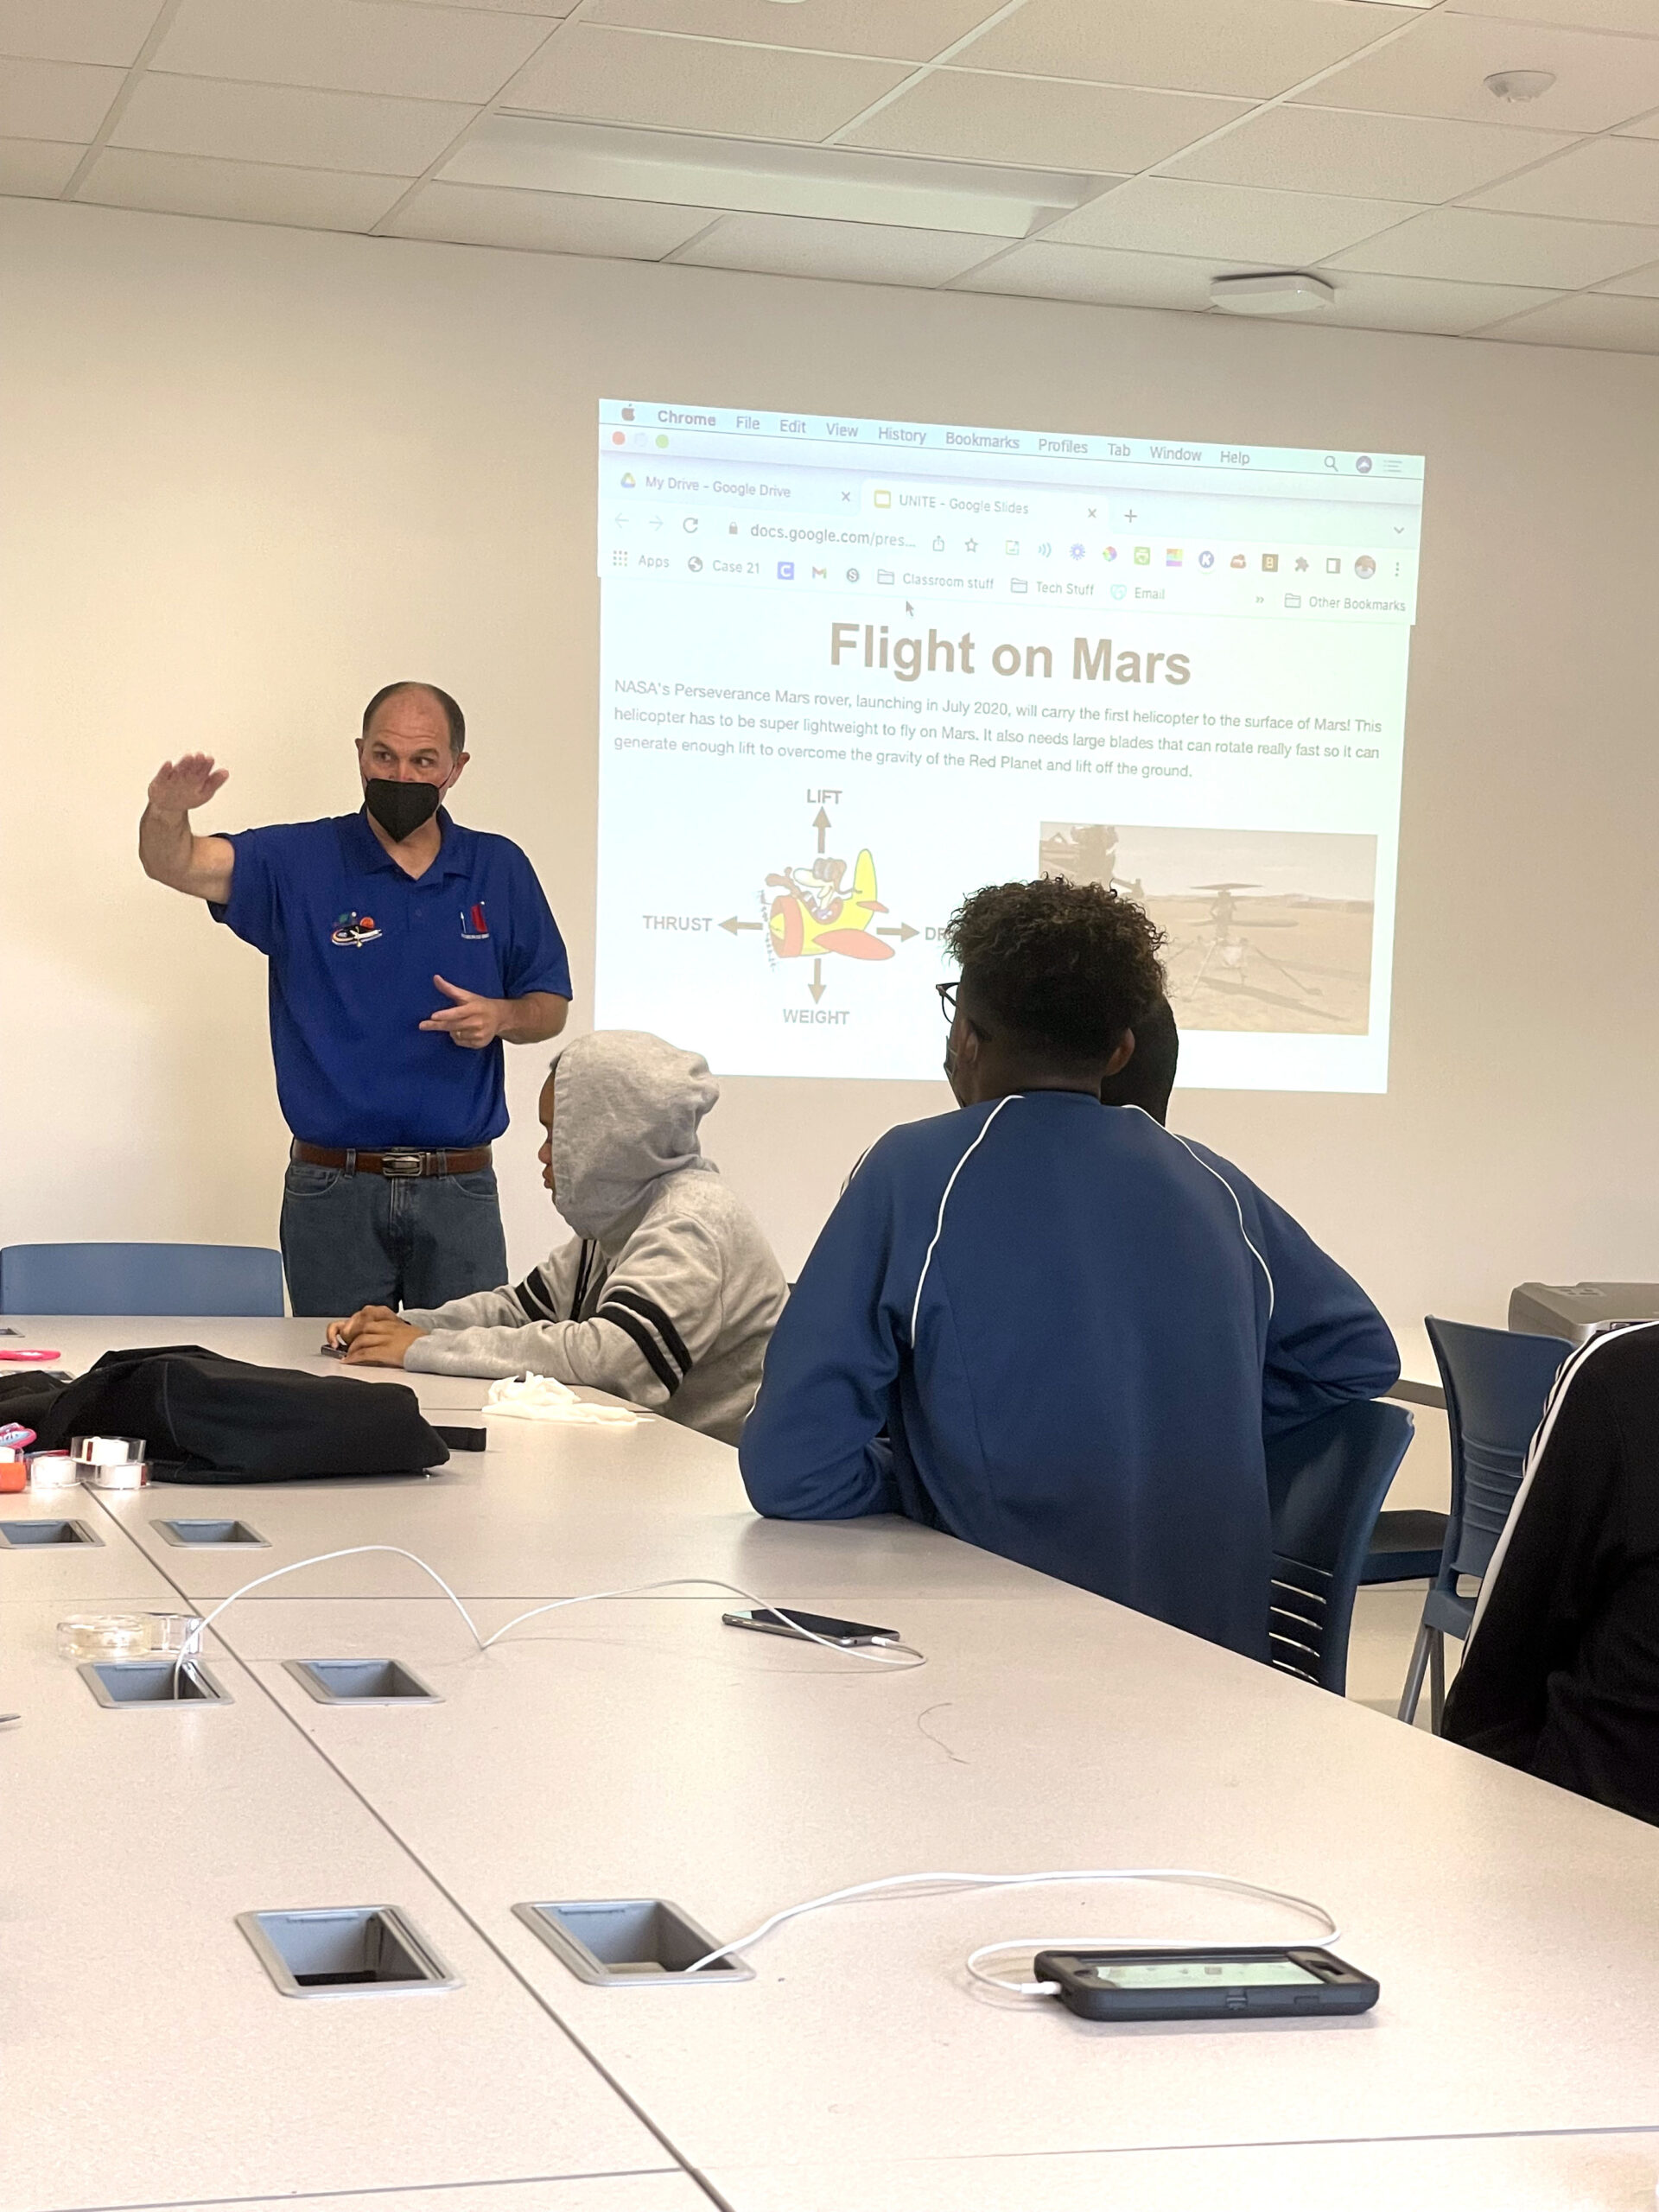 A man stands in front of a projector image titled "Flight on Mars". Three students are sitting at a long desk and listening to the man.